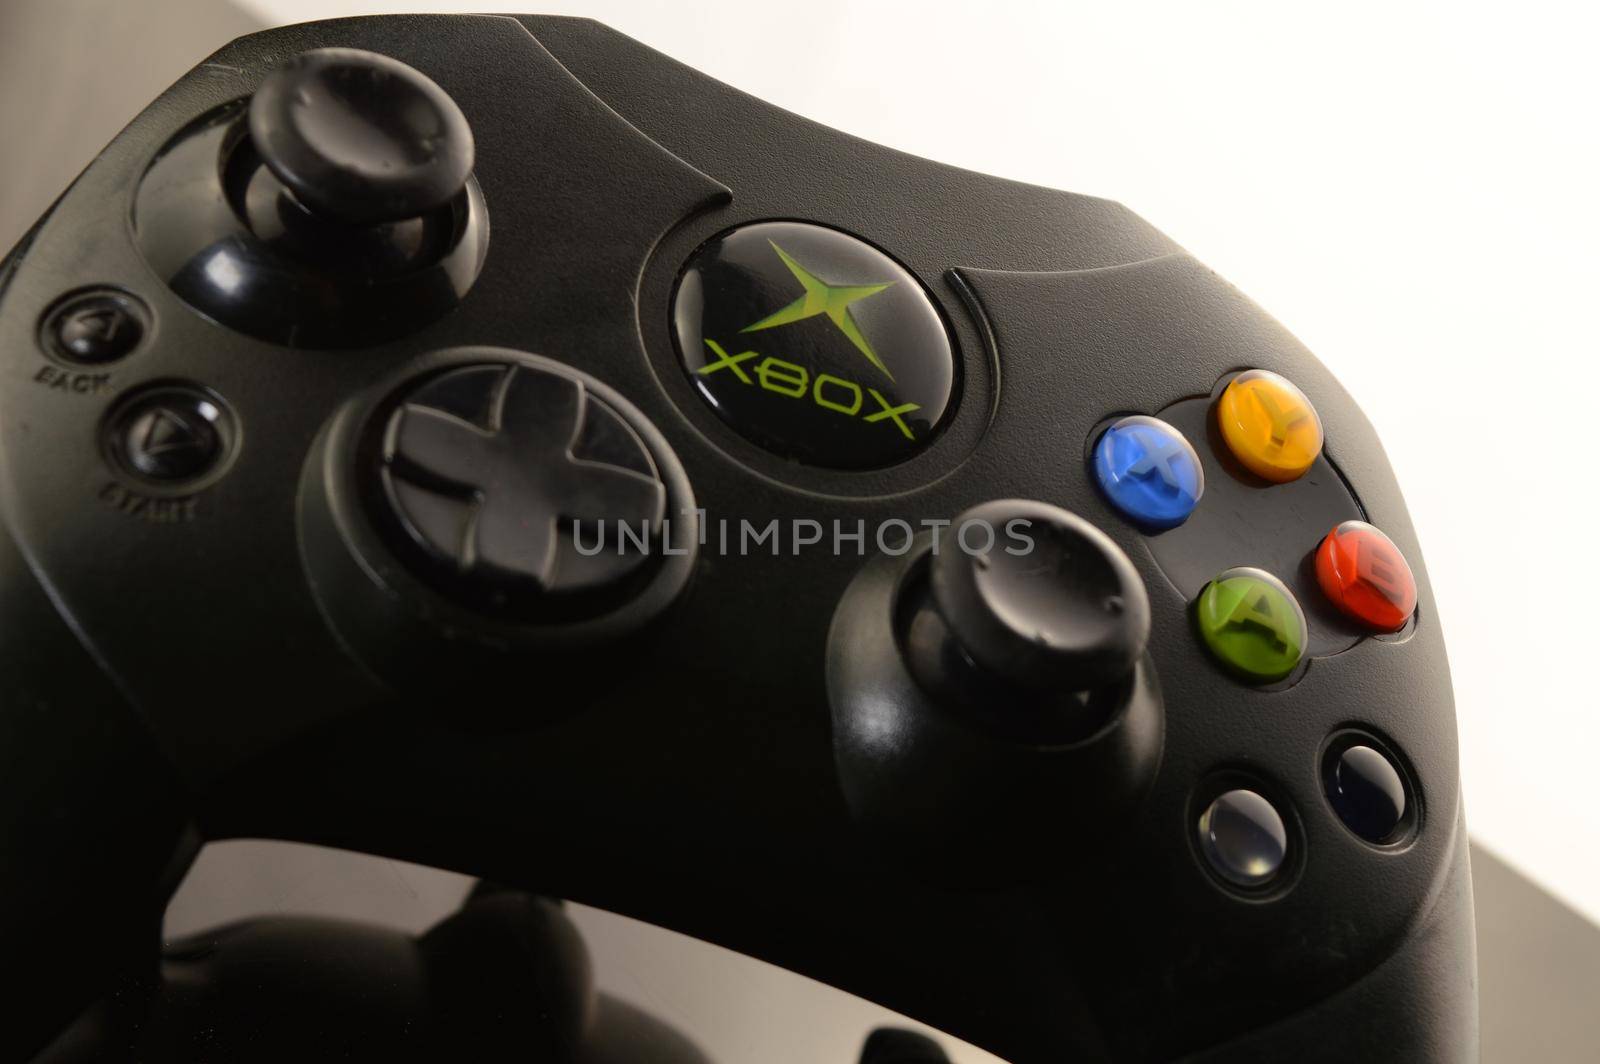 SMITHS FALLS, ONTARIO, CANADA: JANUARY 23, 2021 - An Xbox video game controller over a black and white reflective background.